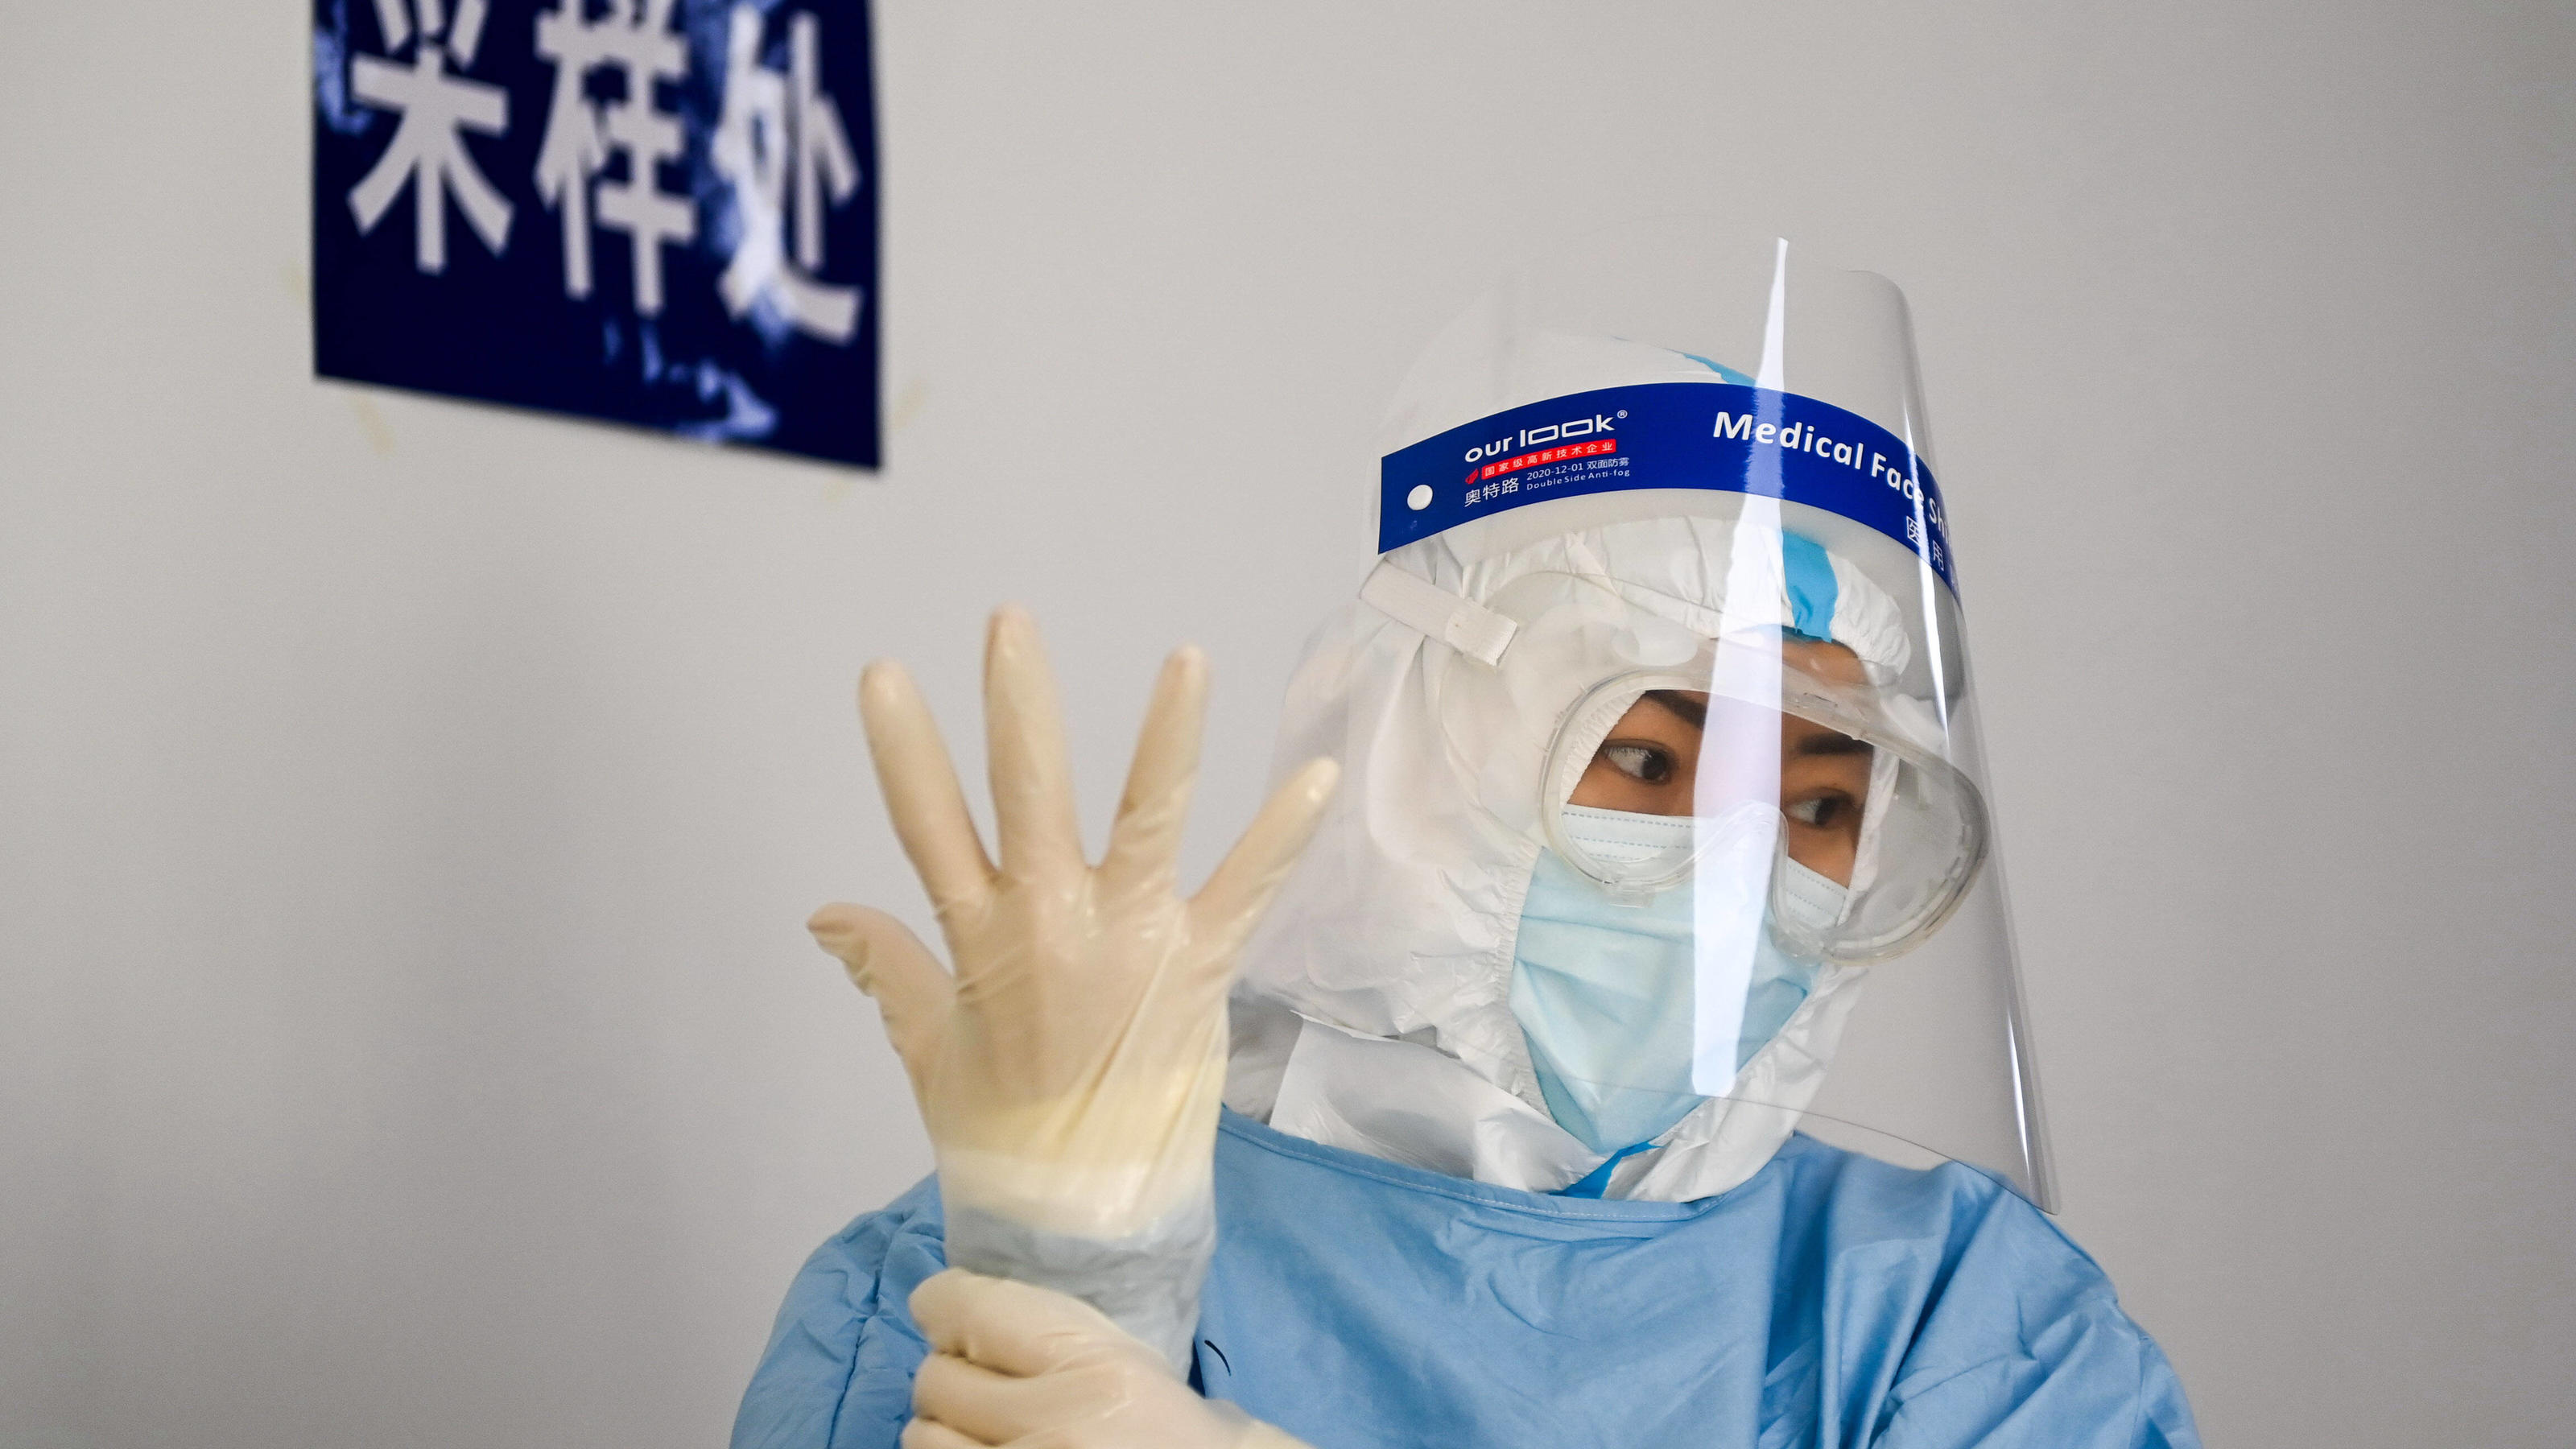 News Bilder des Tages 210122 -- CHANGCHUN, Jan. 22, 2021 -- A medical worker gets her hands sterilized at a nucleic acid testing site in Kaiyun Community of Chaoyang District in Changchun, northeast China s Jilin Province, Jan. 22, 2021. As of 2 p.m.